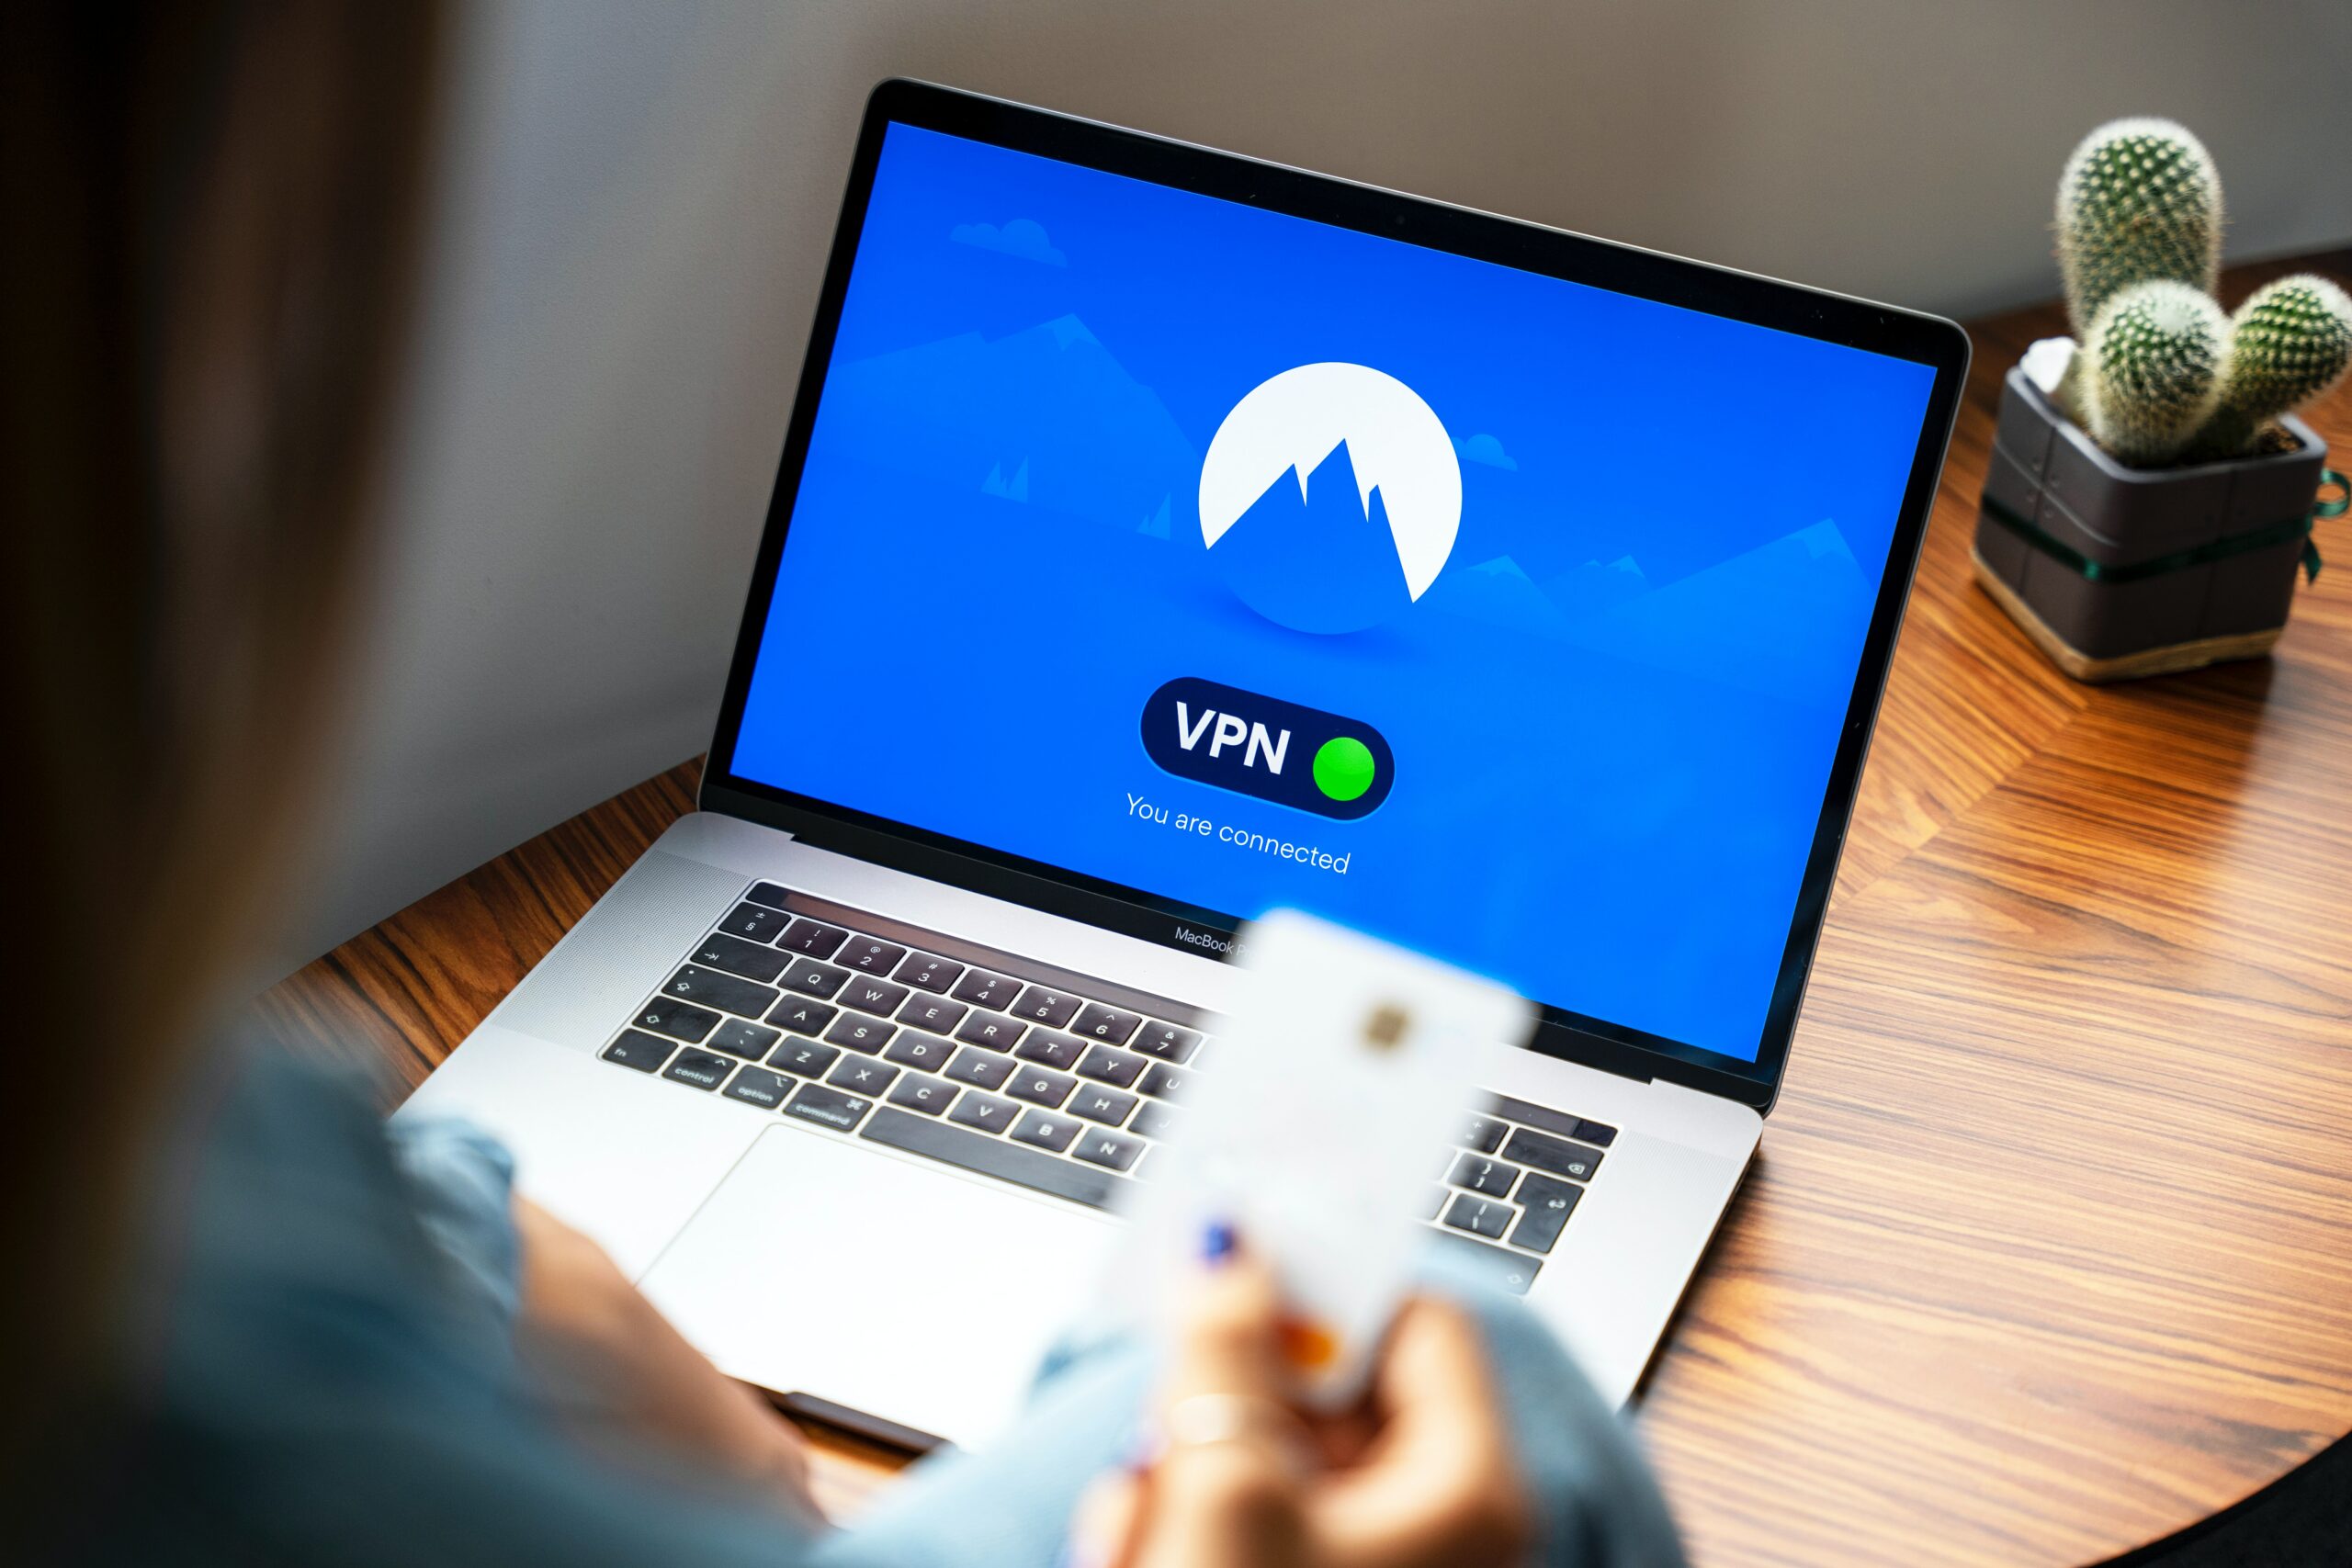 VPN Connected image